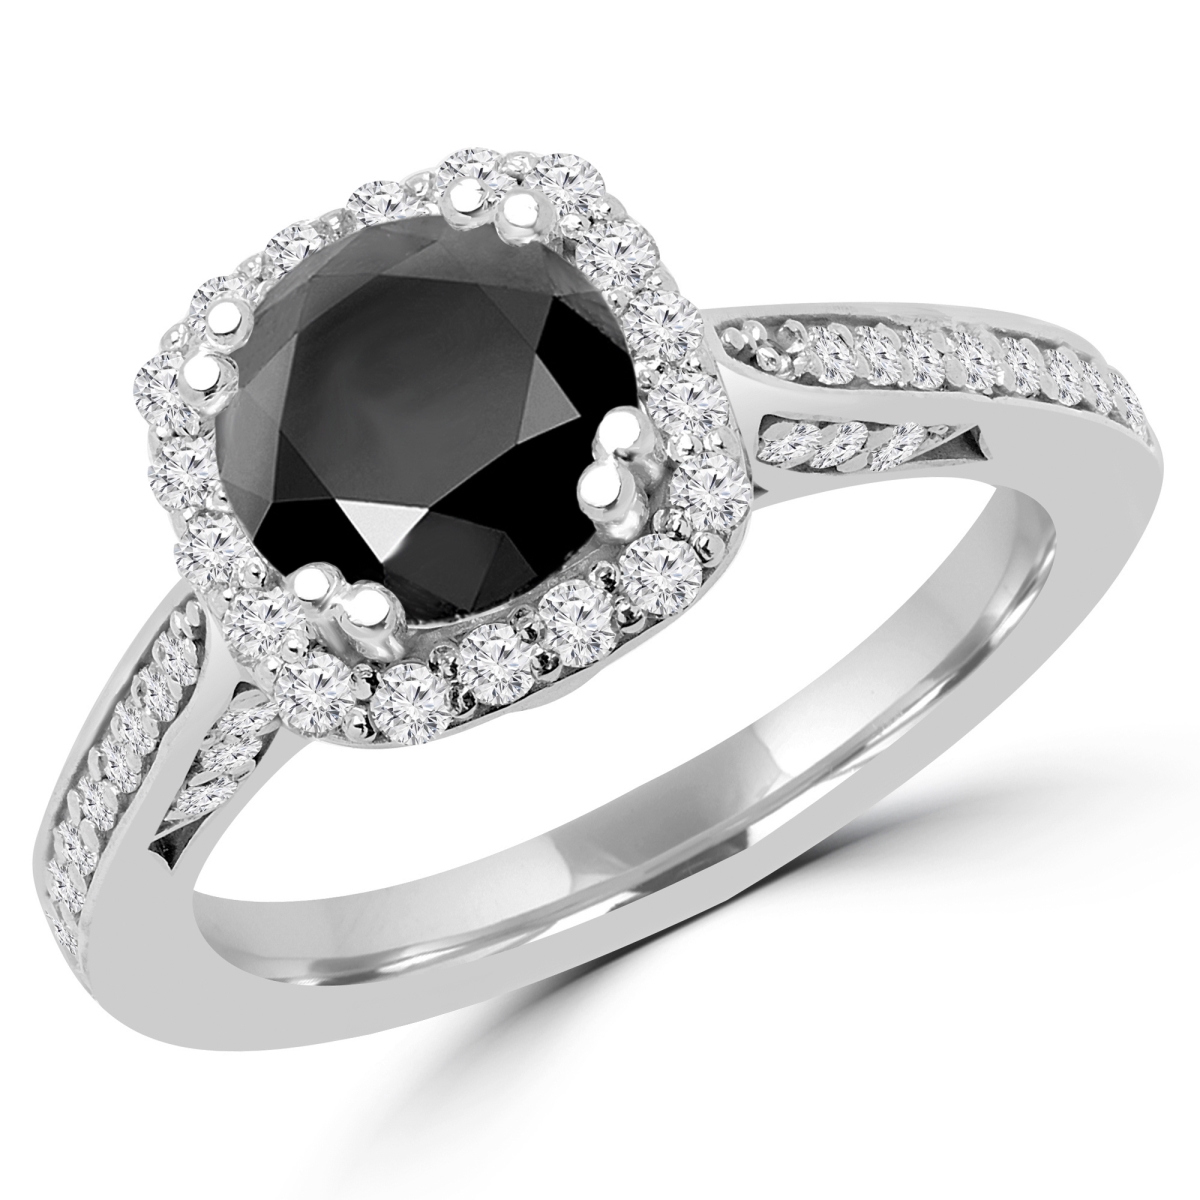 Picture of Majesty Diamonds MD170294-7.75 2.25 CTW Round Black Diamond Halo Engagement Ring in 18k White Gold - Size 7.75